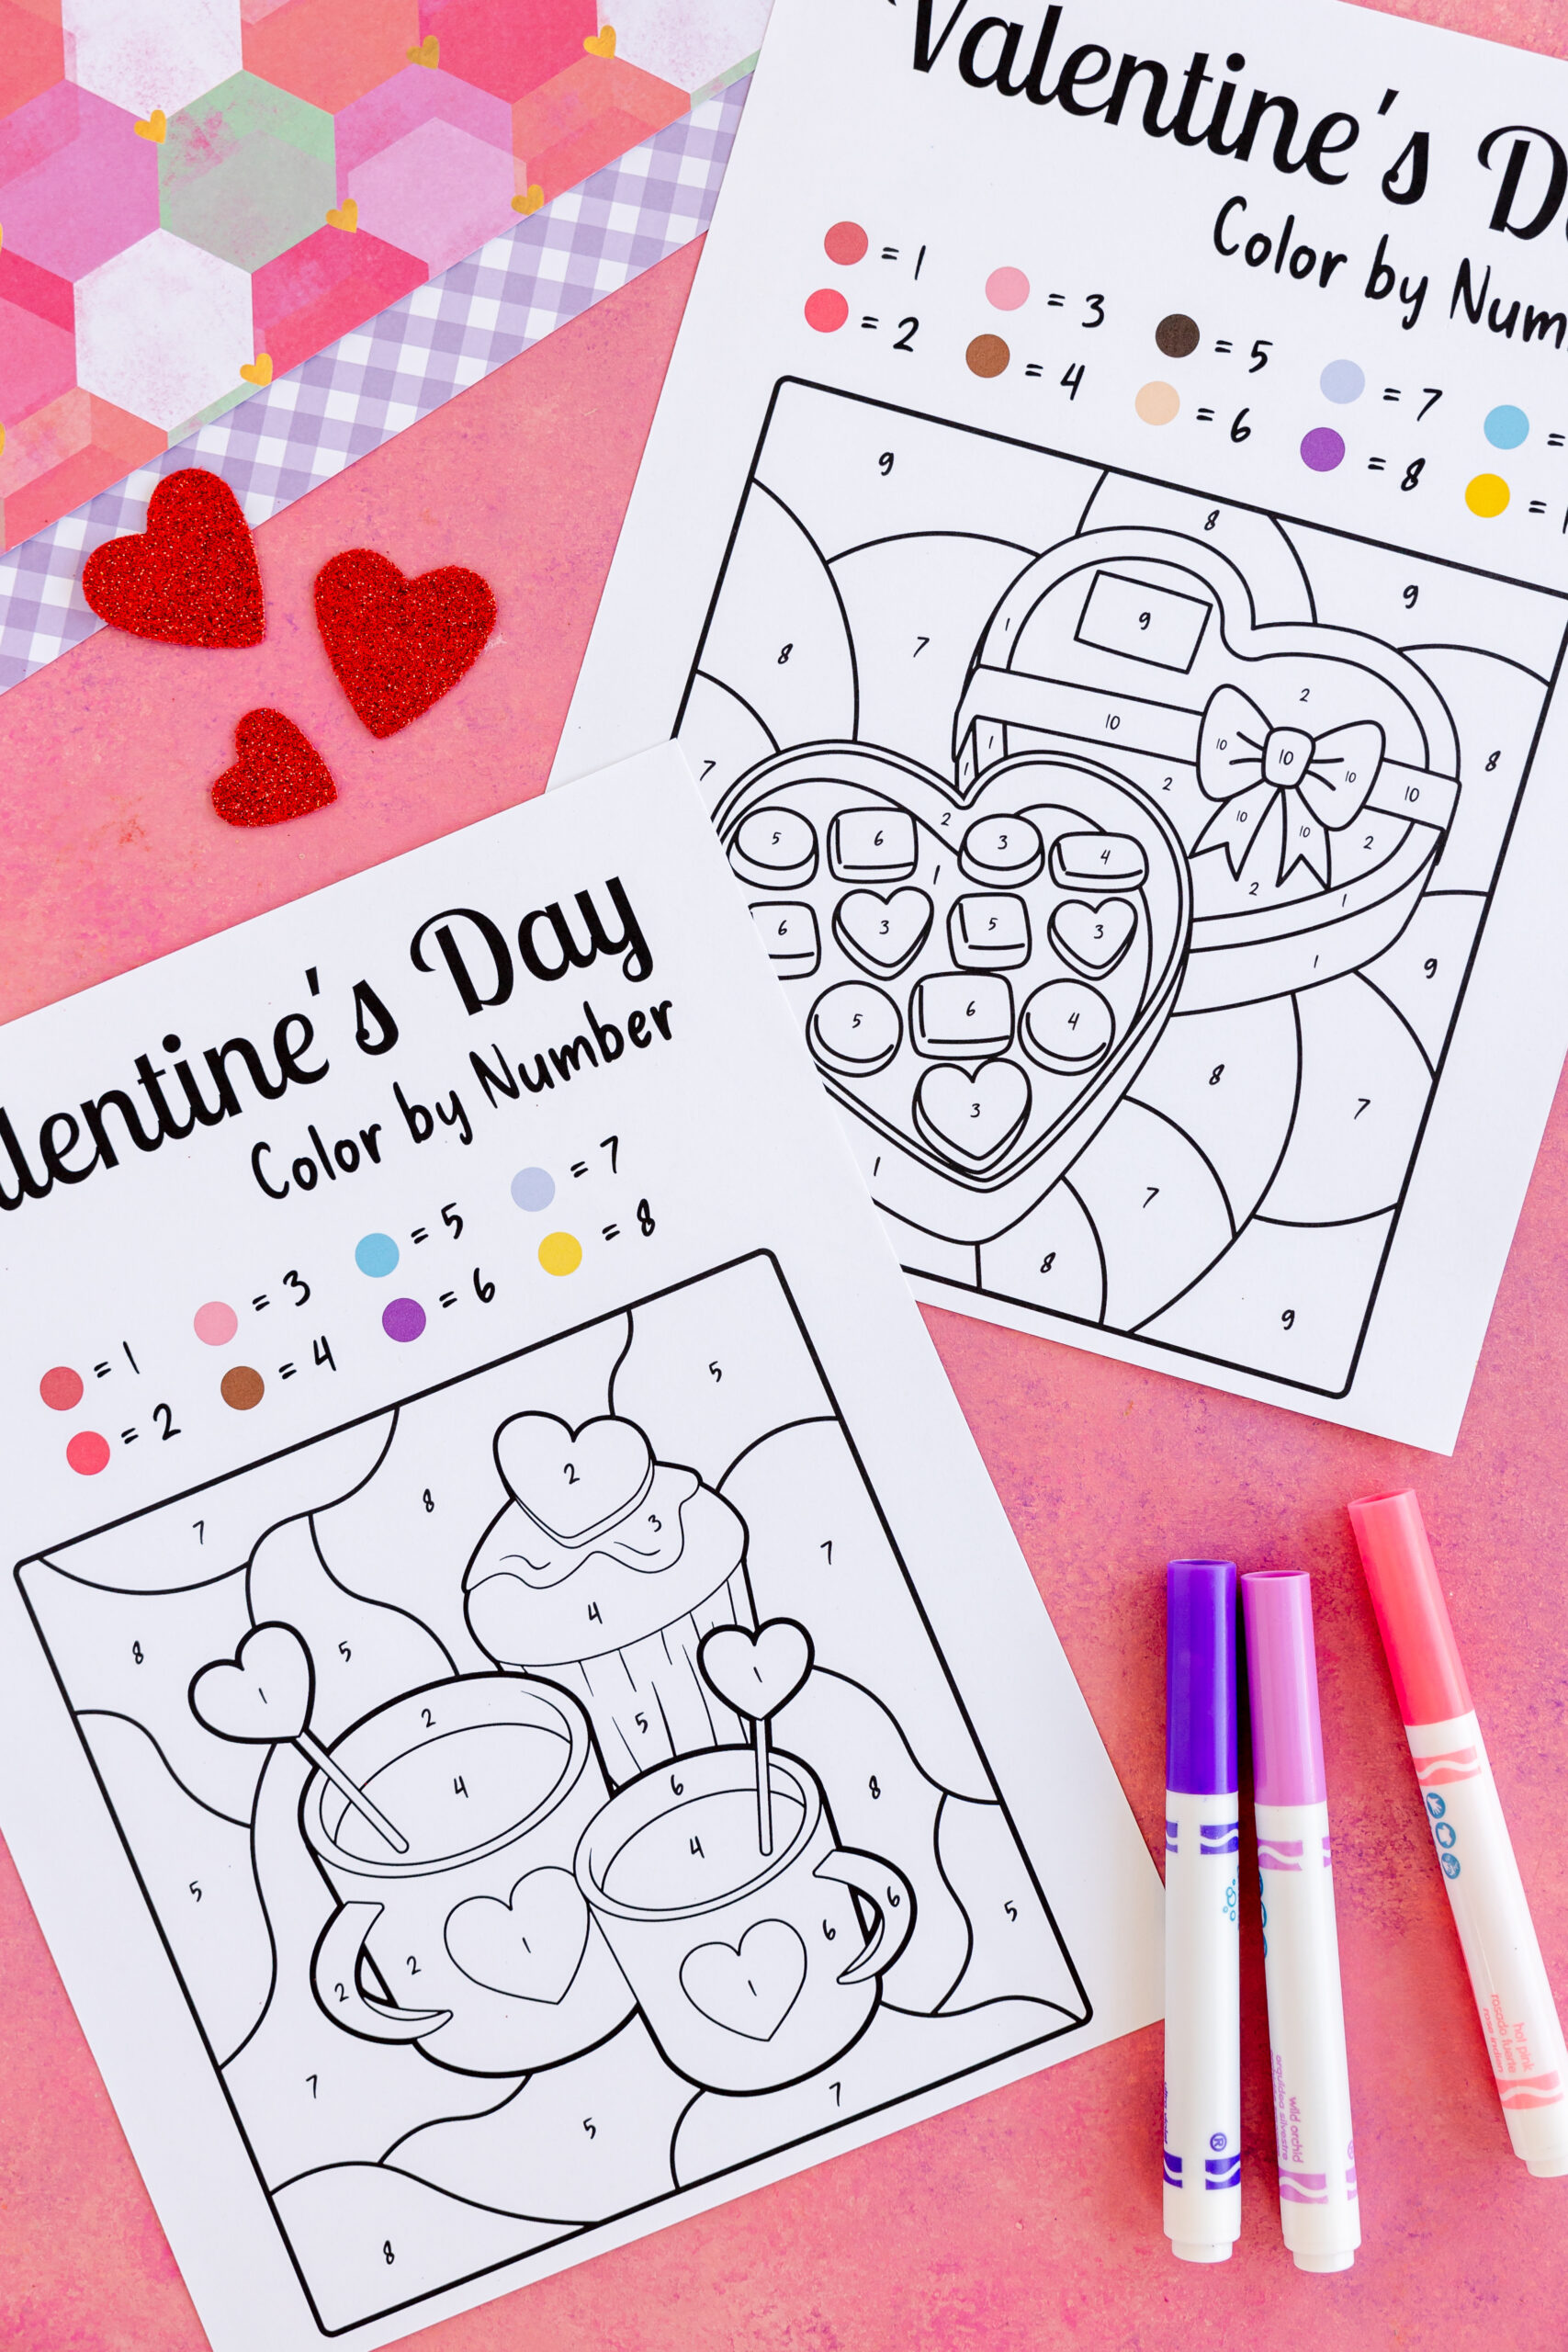 blank color by number pages with various valentine's images